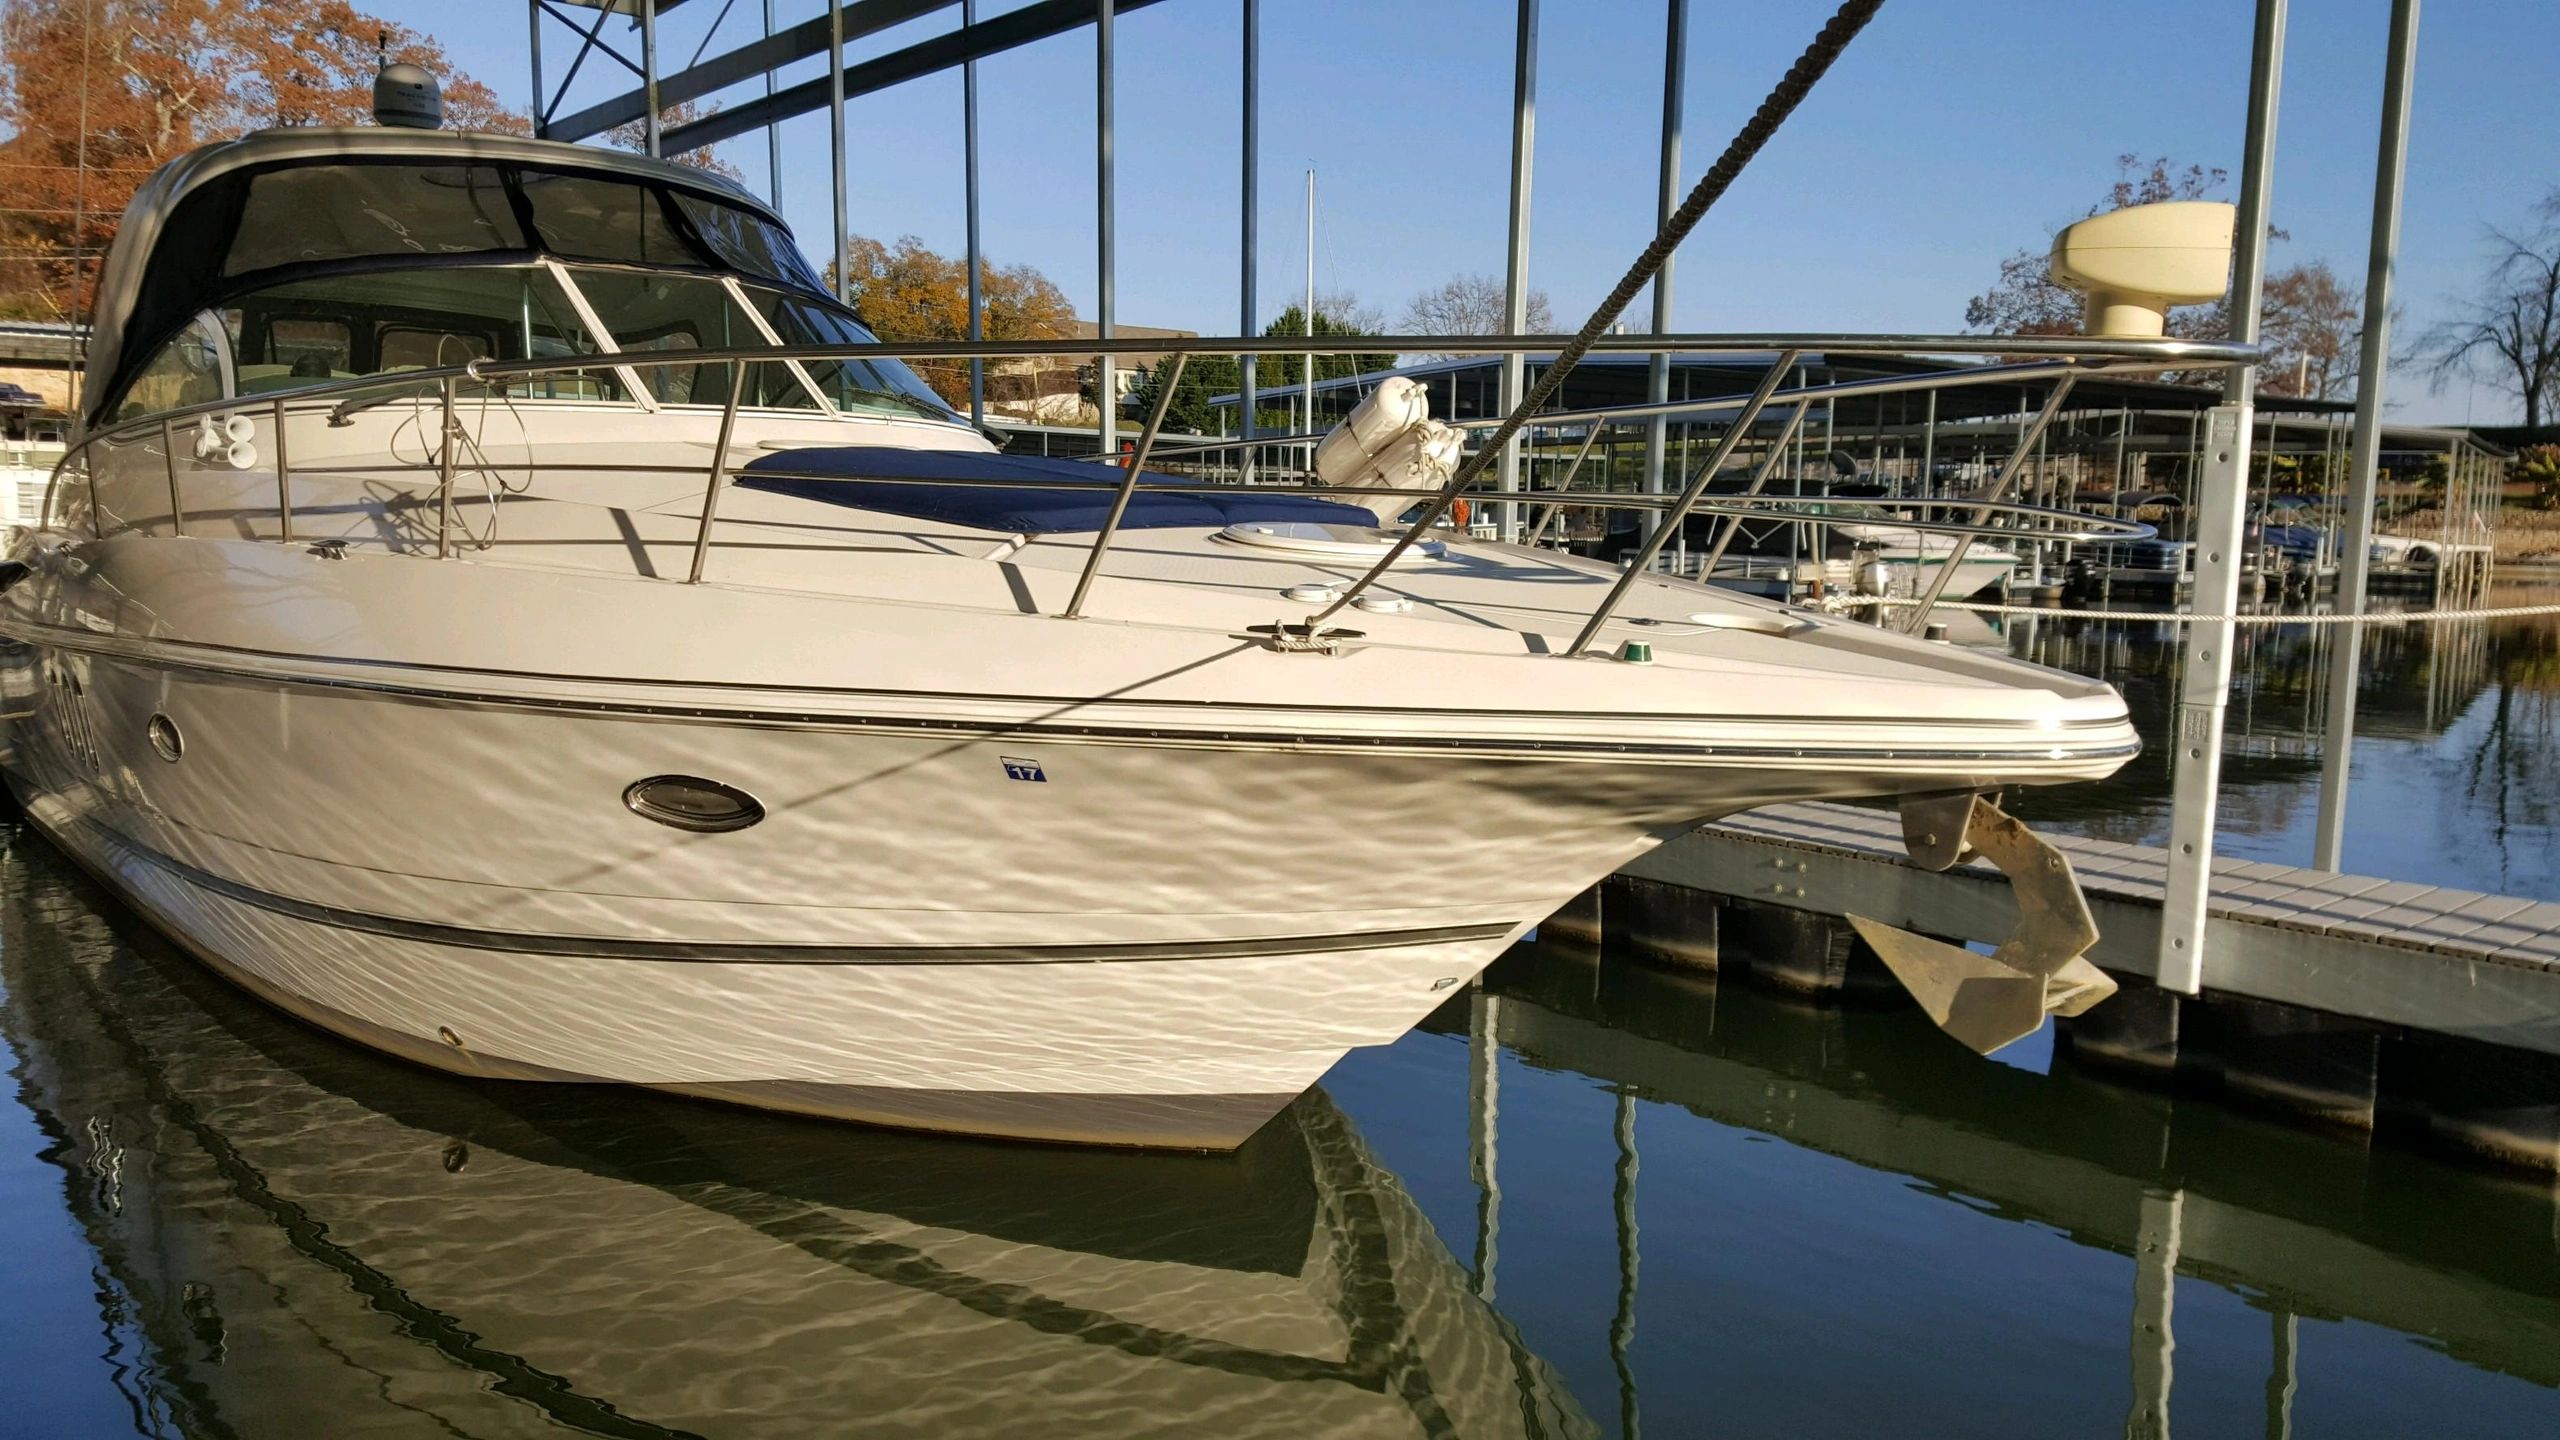 Boat washing, detailing, buffing and wax in Chattanooga.